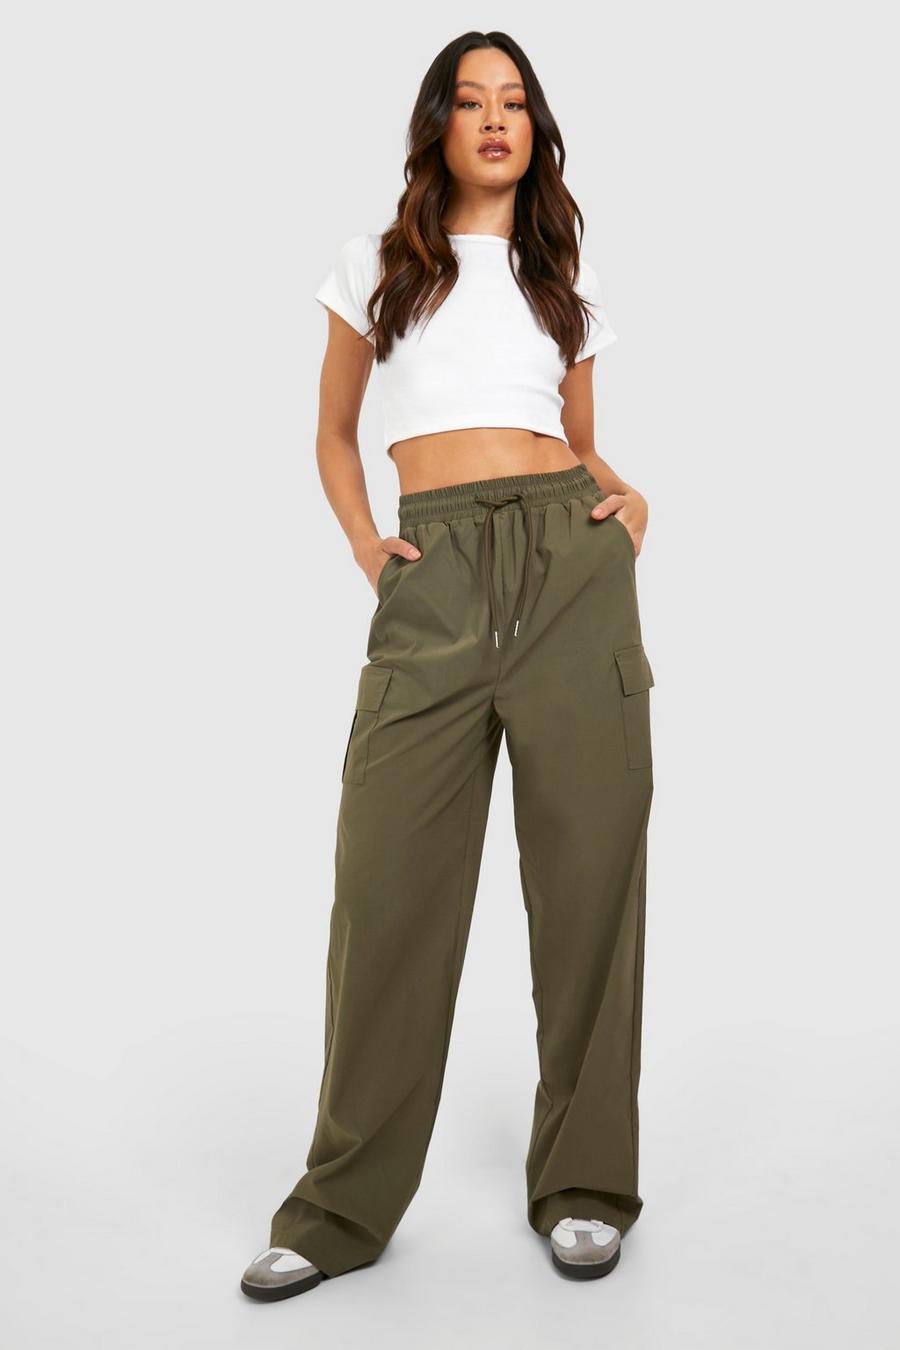 Womens Casual High Waisted Cargo Pants with Pockets